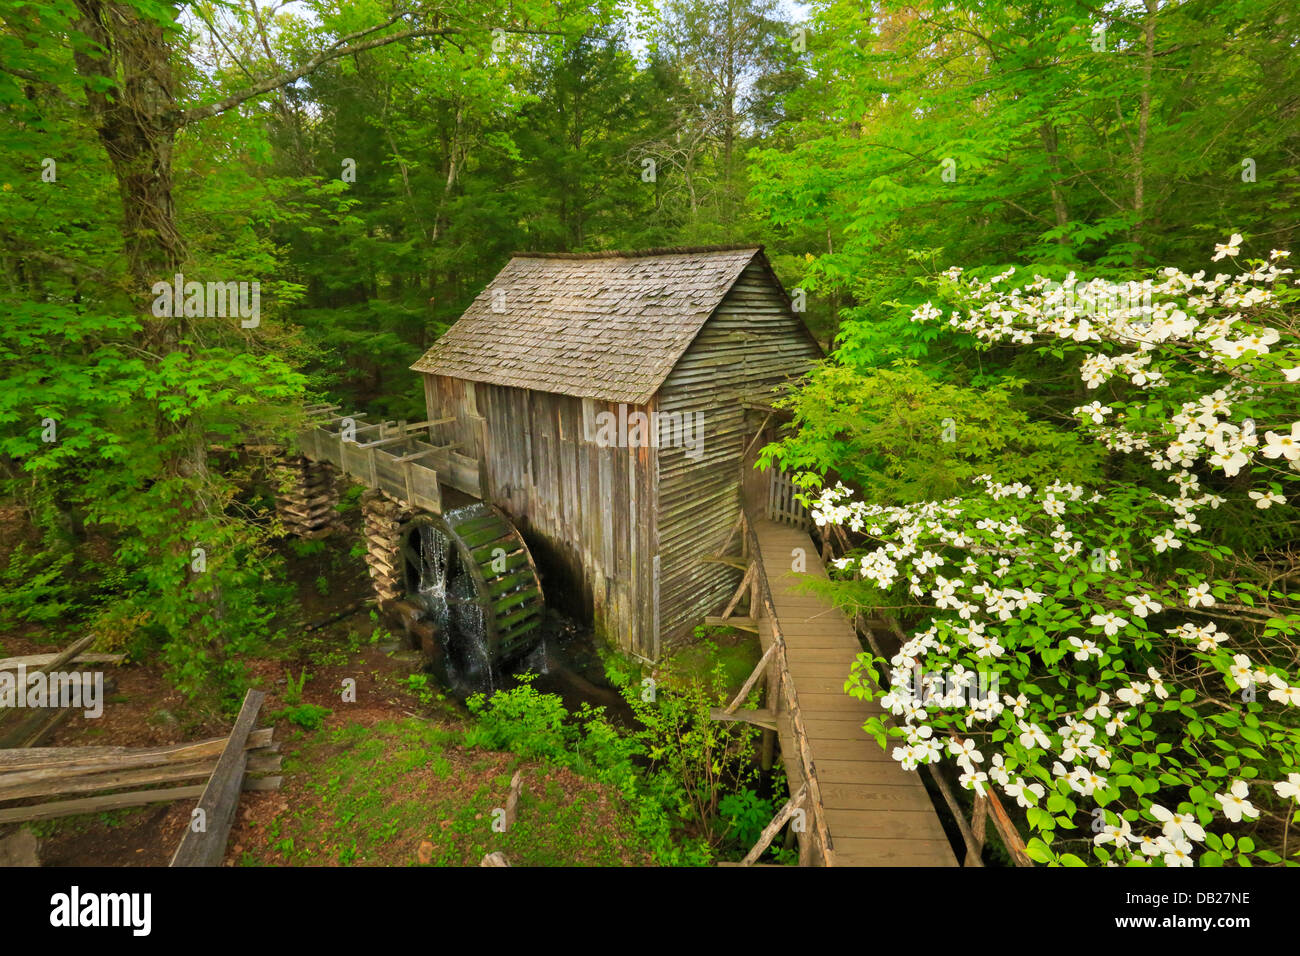 John P Kabel Grist Mill, Cades Cove, große Smoky Mountains National Park, Tennessee, USA Stockfoto